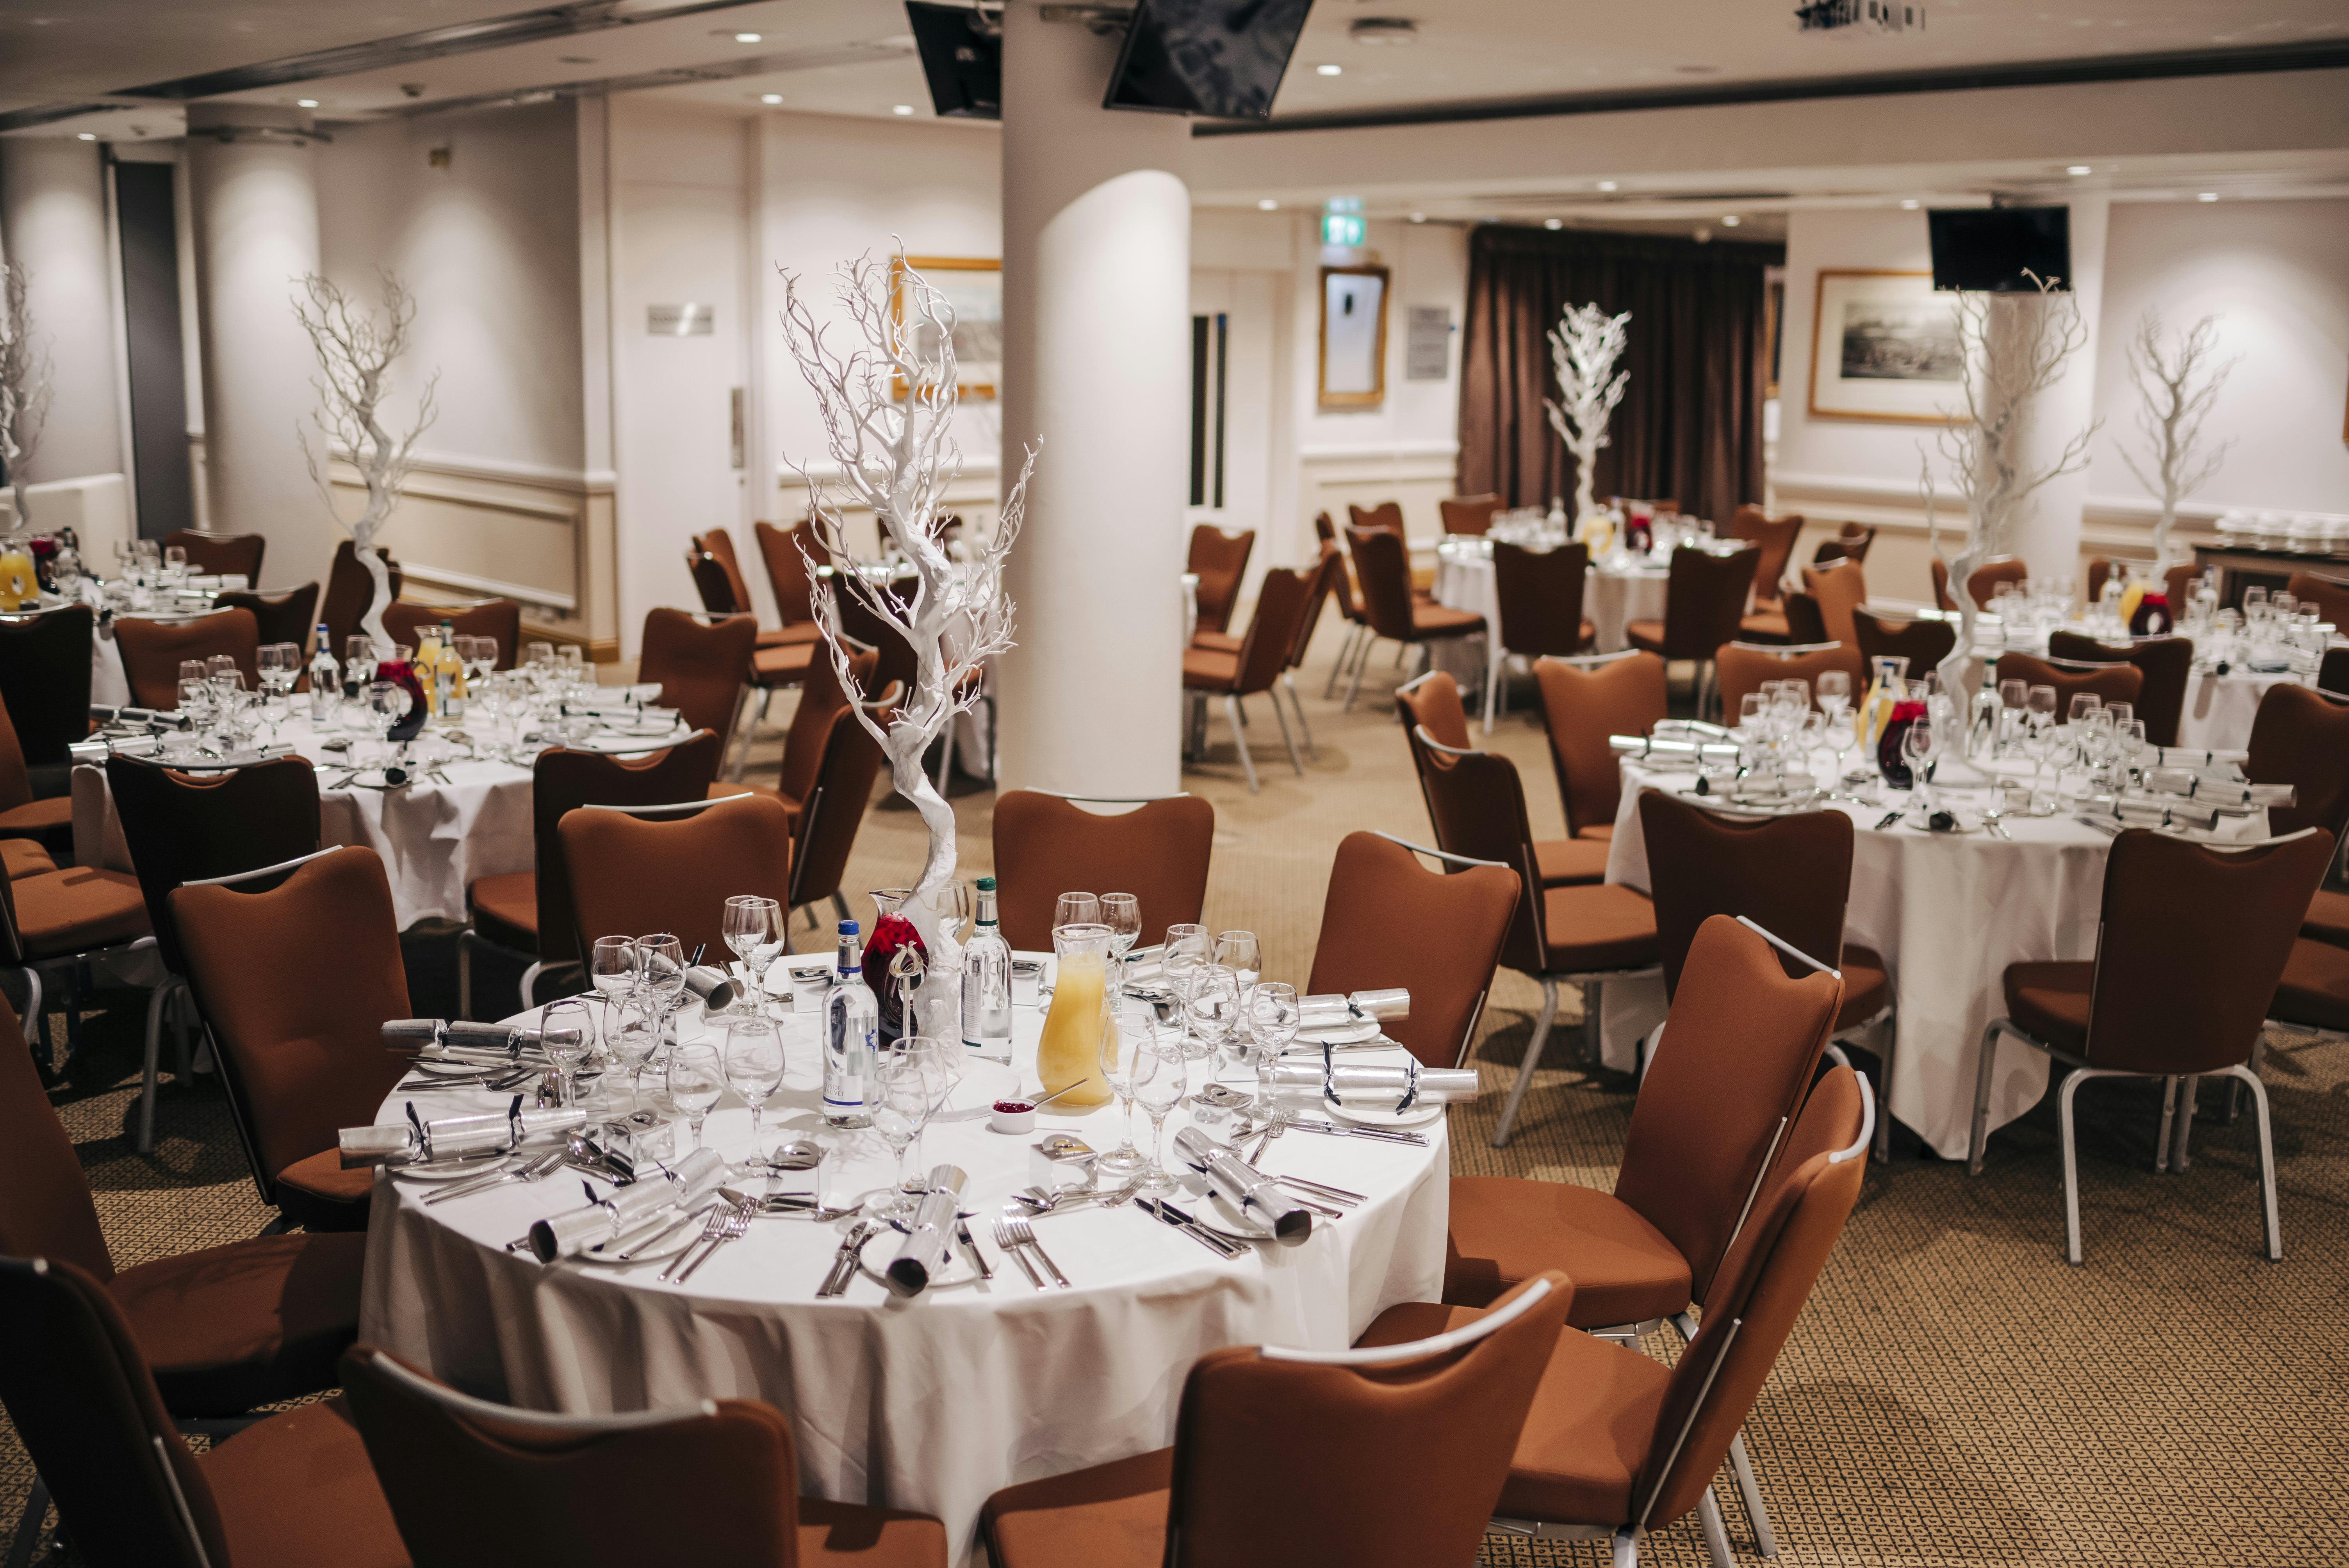 Away Day Activities Venues in London - Epsom Downs Racecourse